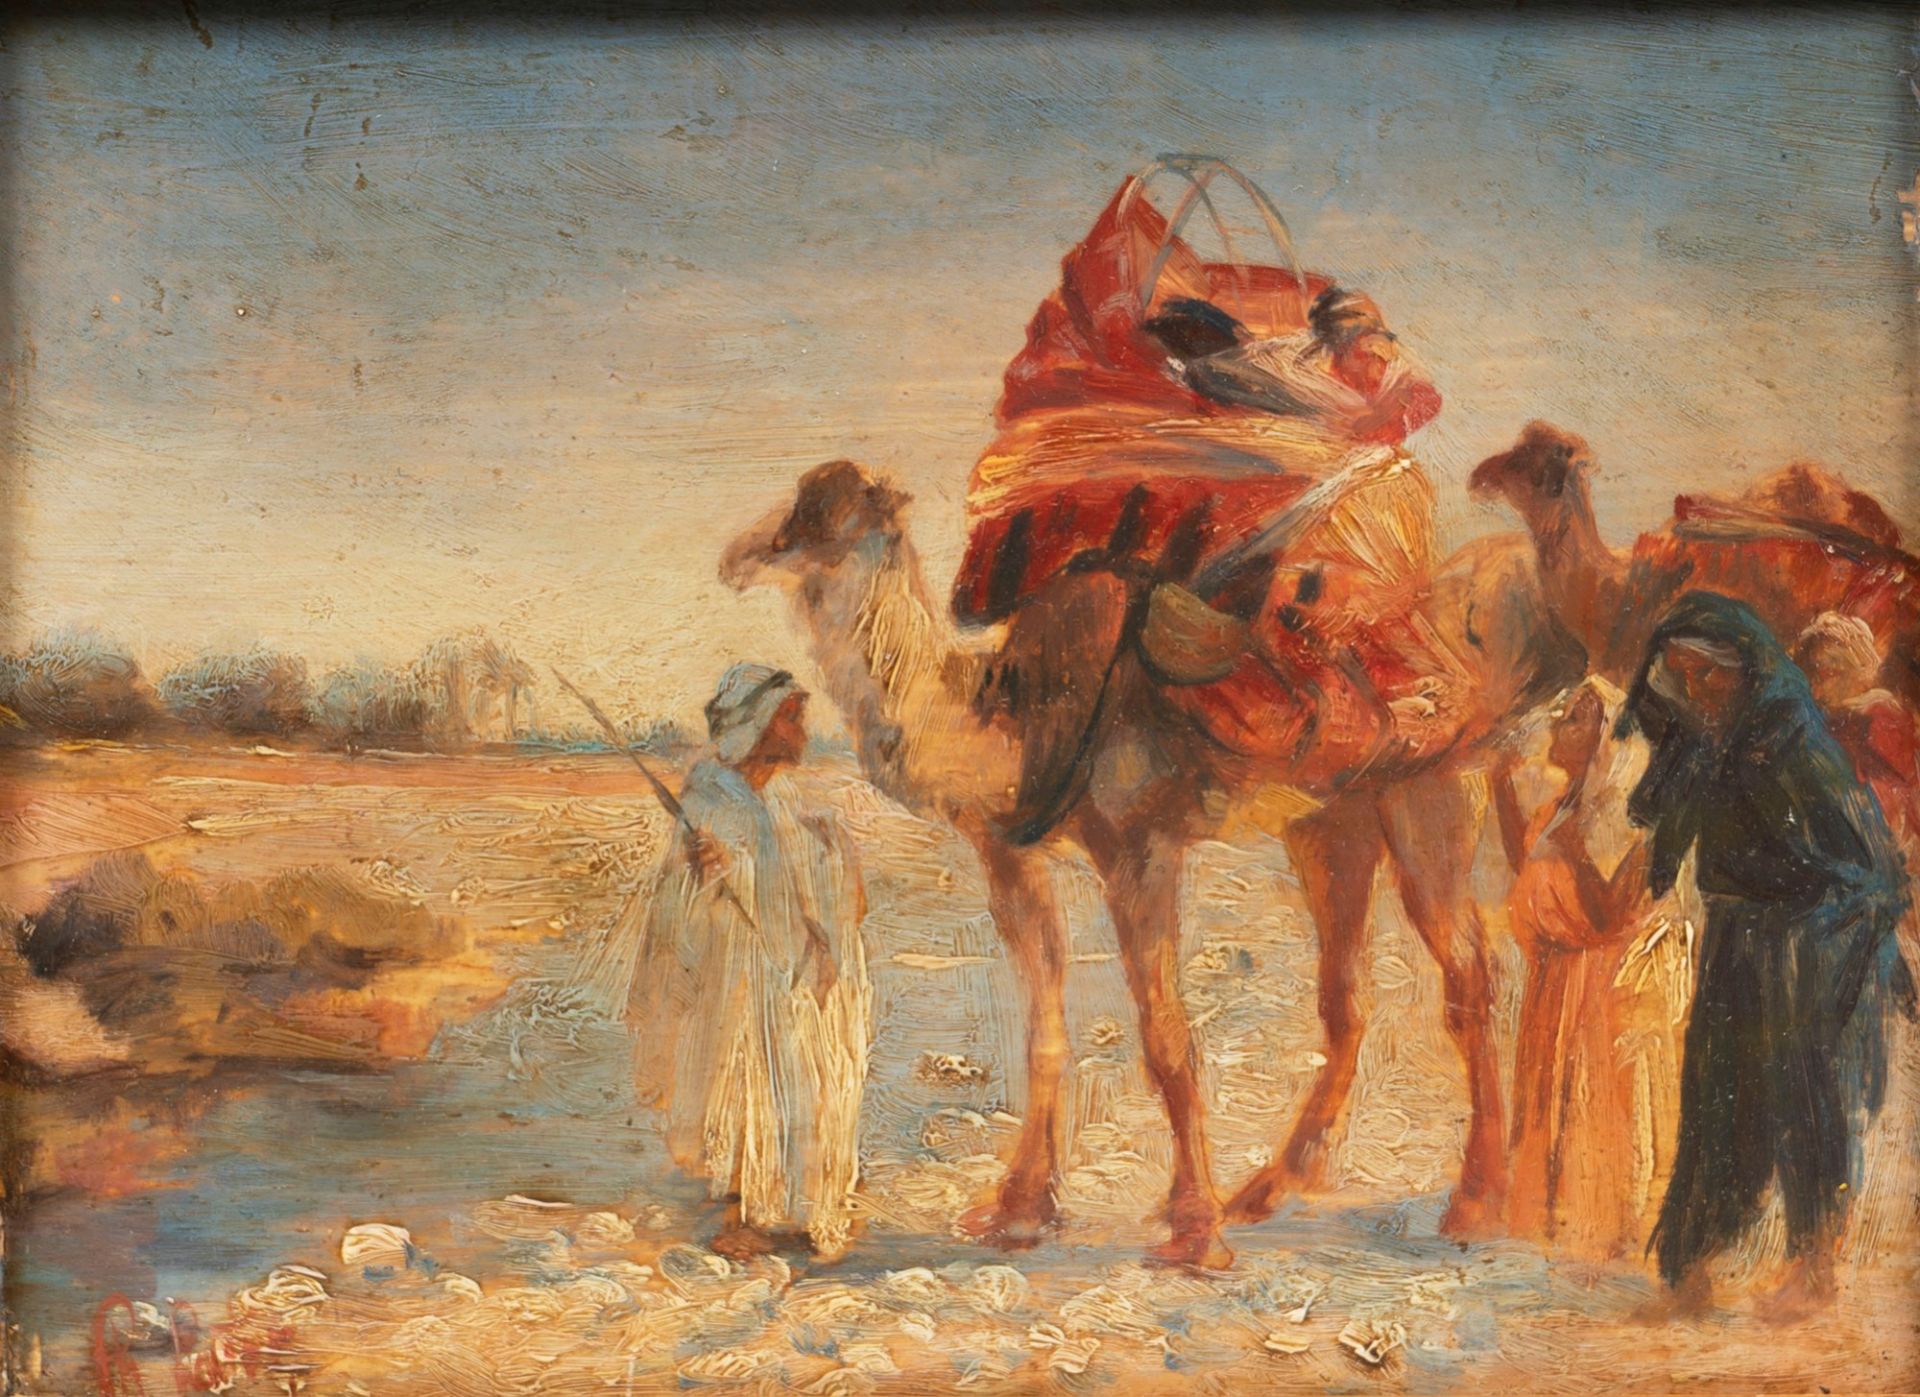 European school end of XIX century - Orientalist landscape with Bedouins and camels